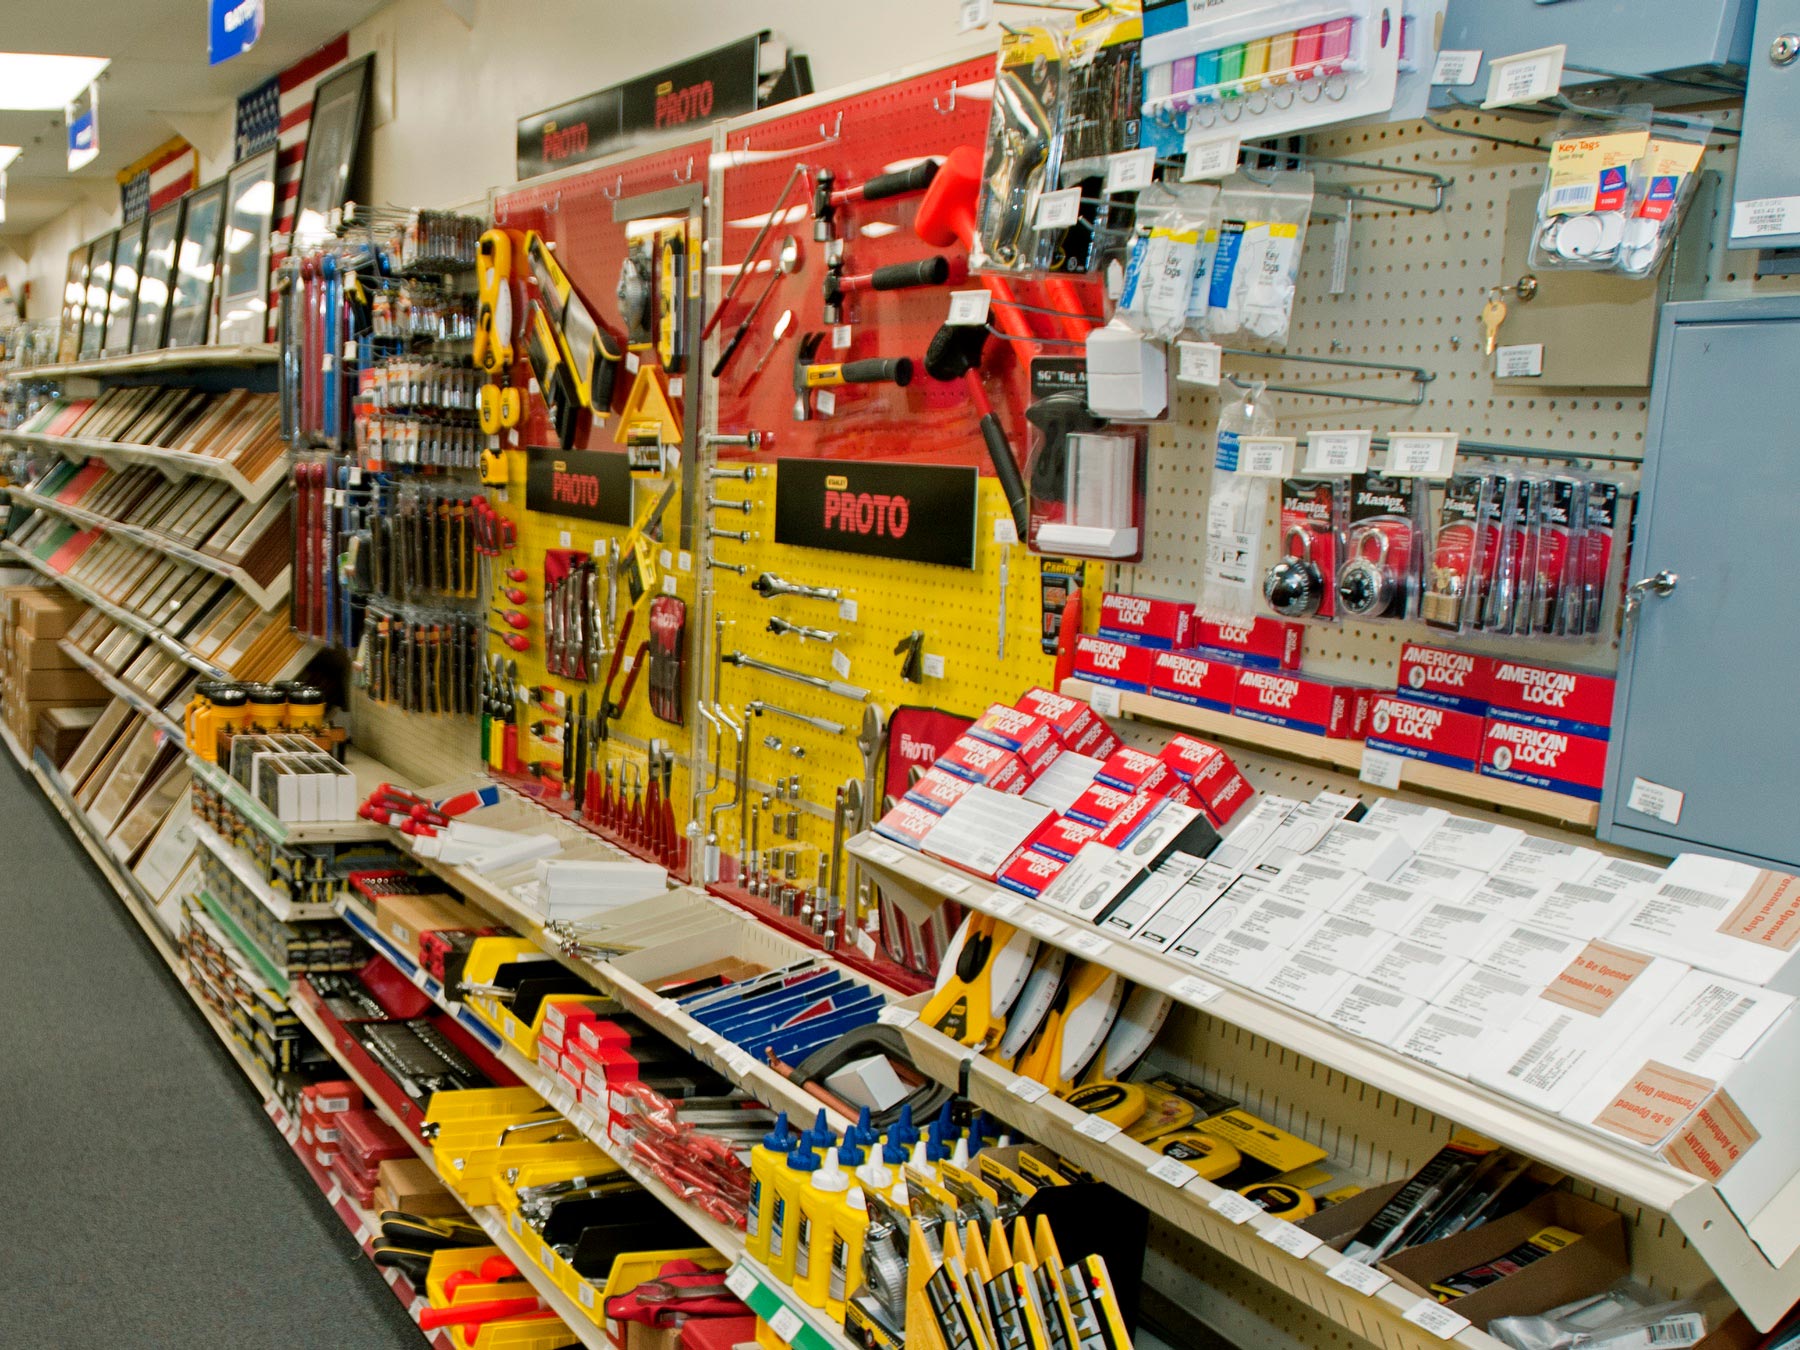 Store isle displaying various tools and office or school supplies